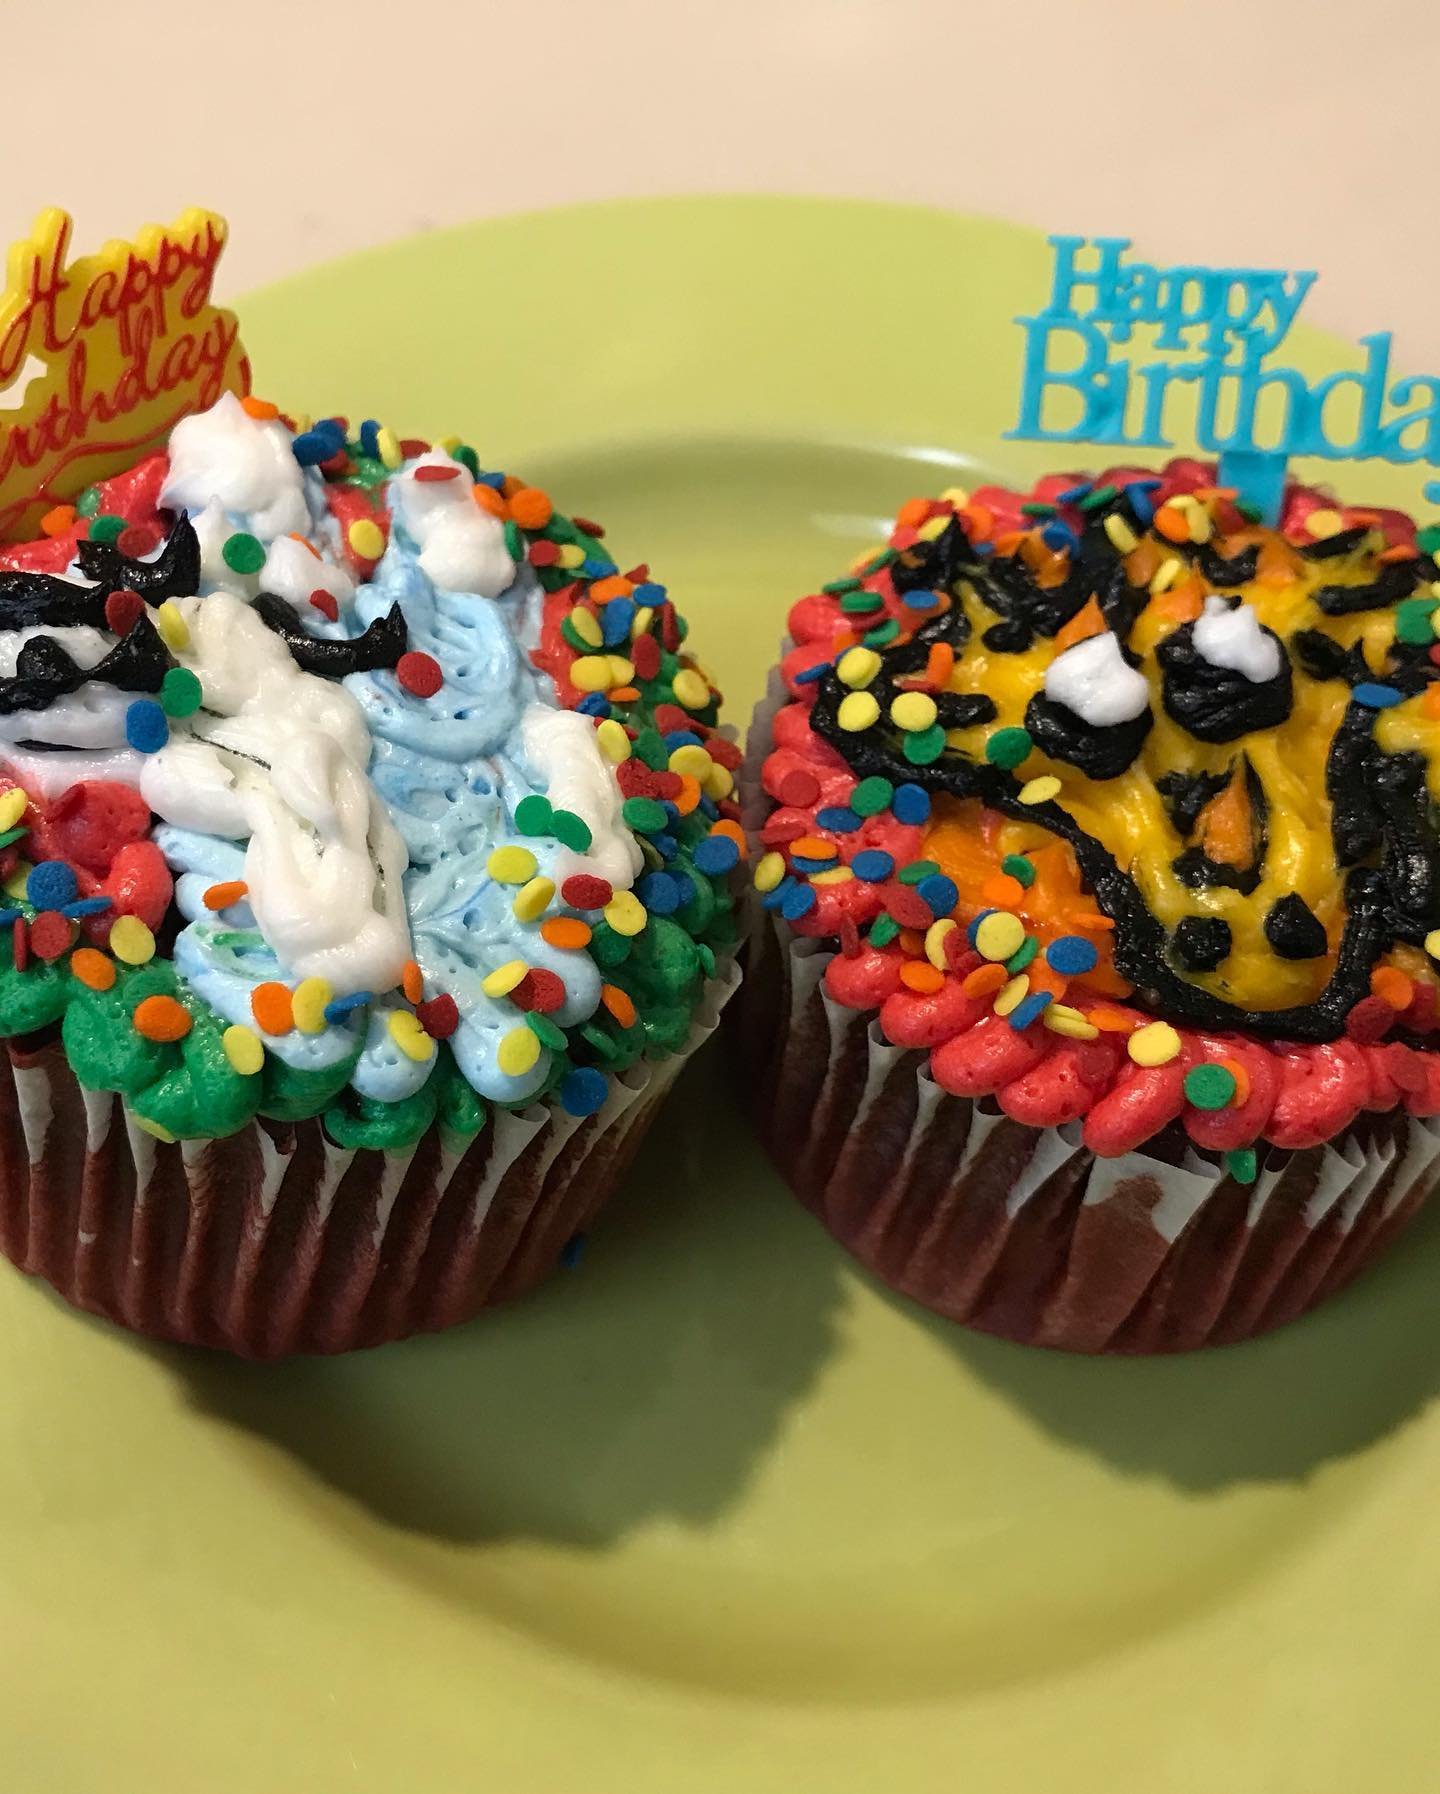 Thank you Bek! For the best birthday cupcakes I have ever got!  Llama and giraffe cupcakes❤️❤️ You&rsquo;re cake decorating skills are leet! 
#artistsoninstagram #sarasota #publixcakes